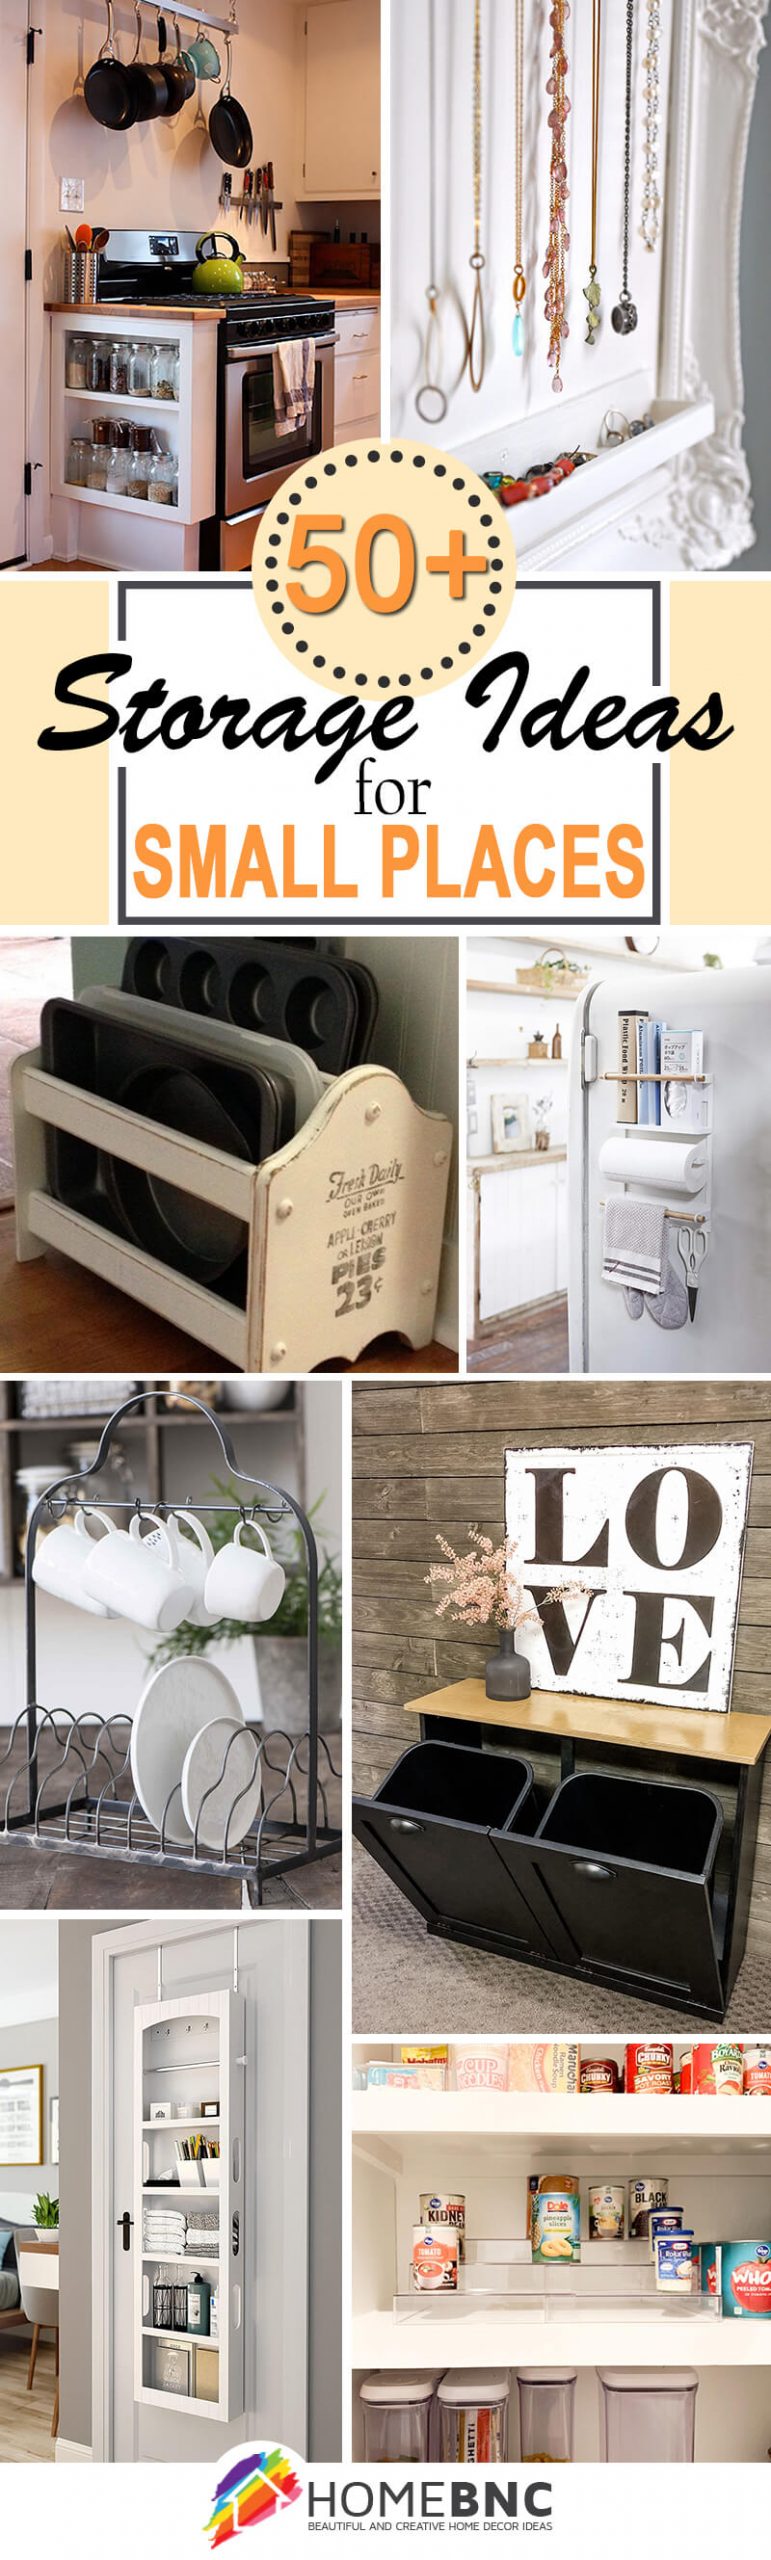 Storage Projects for Small Spaces